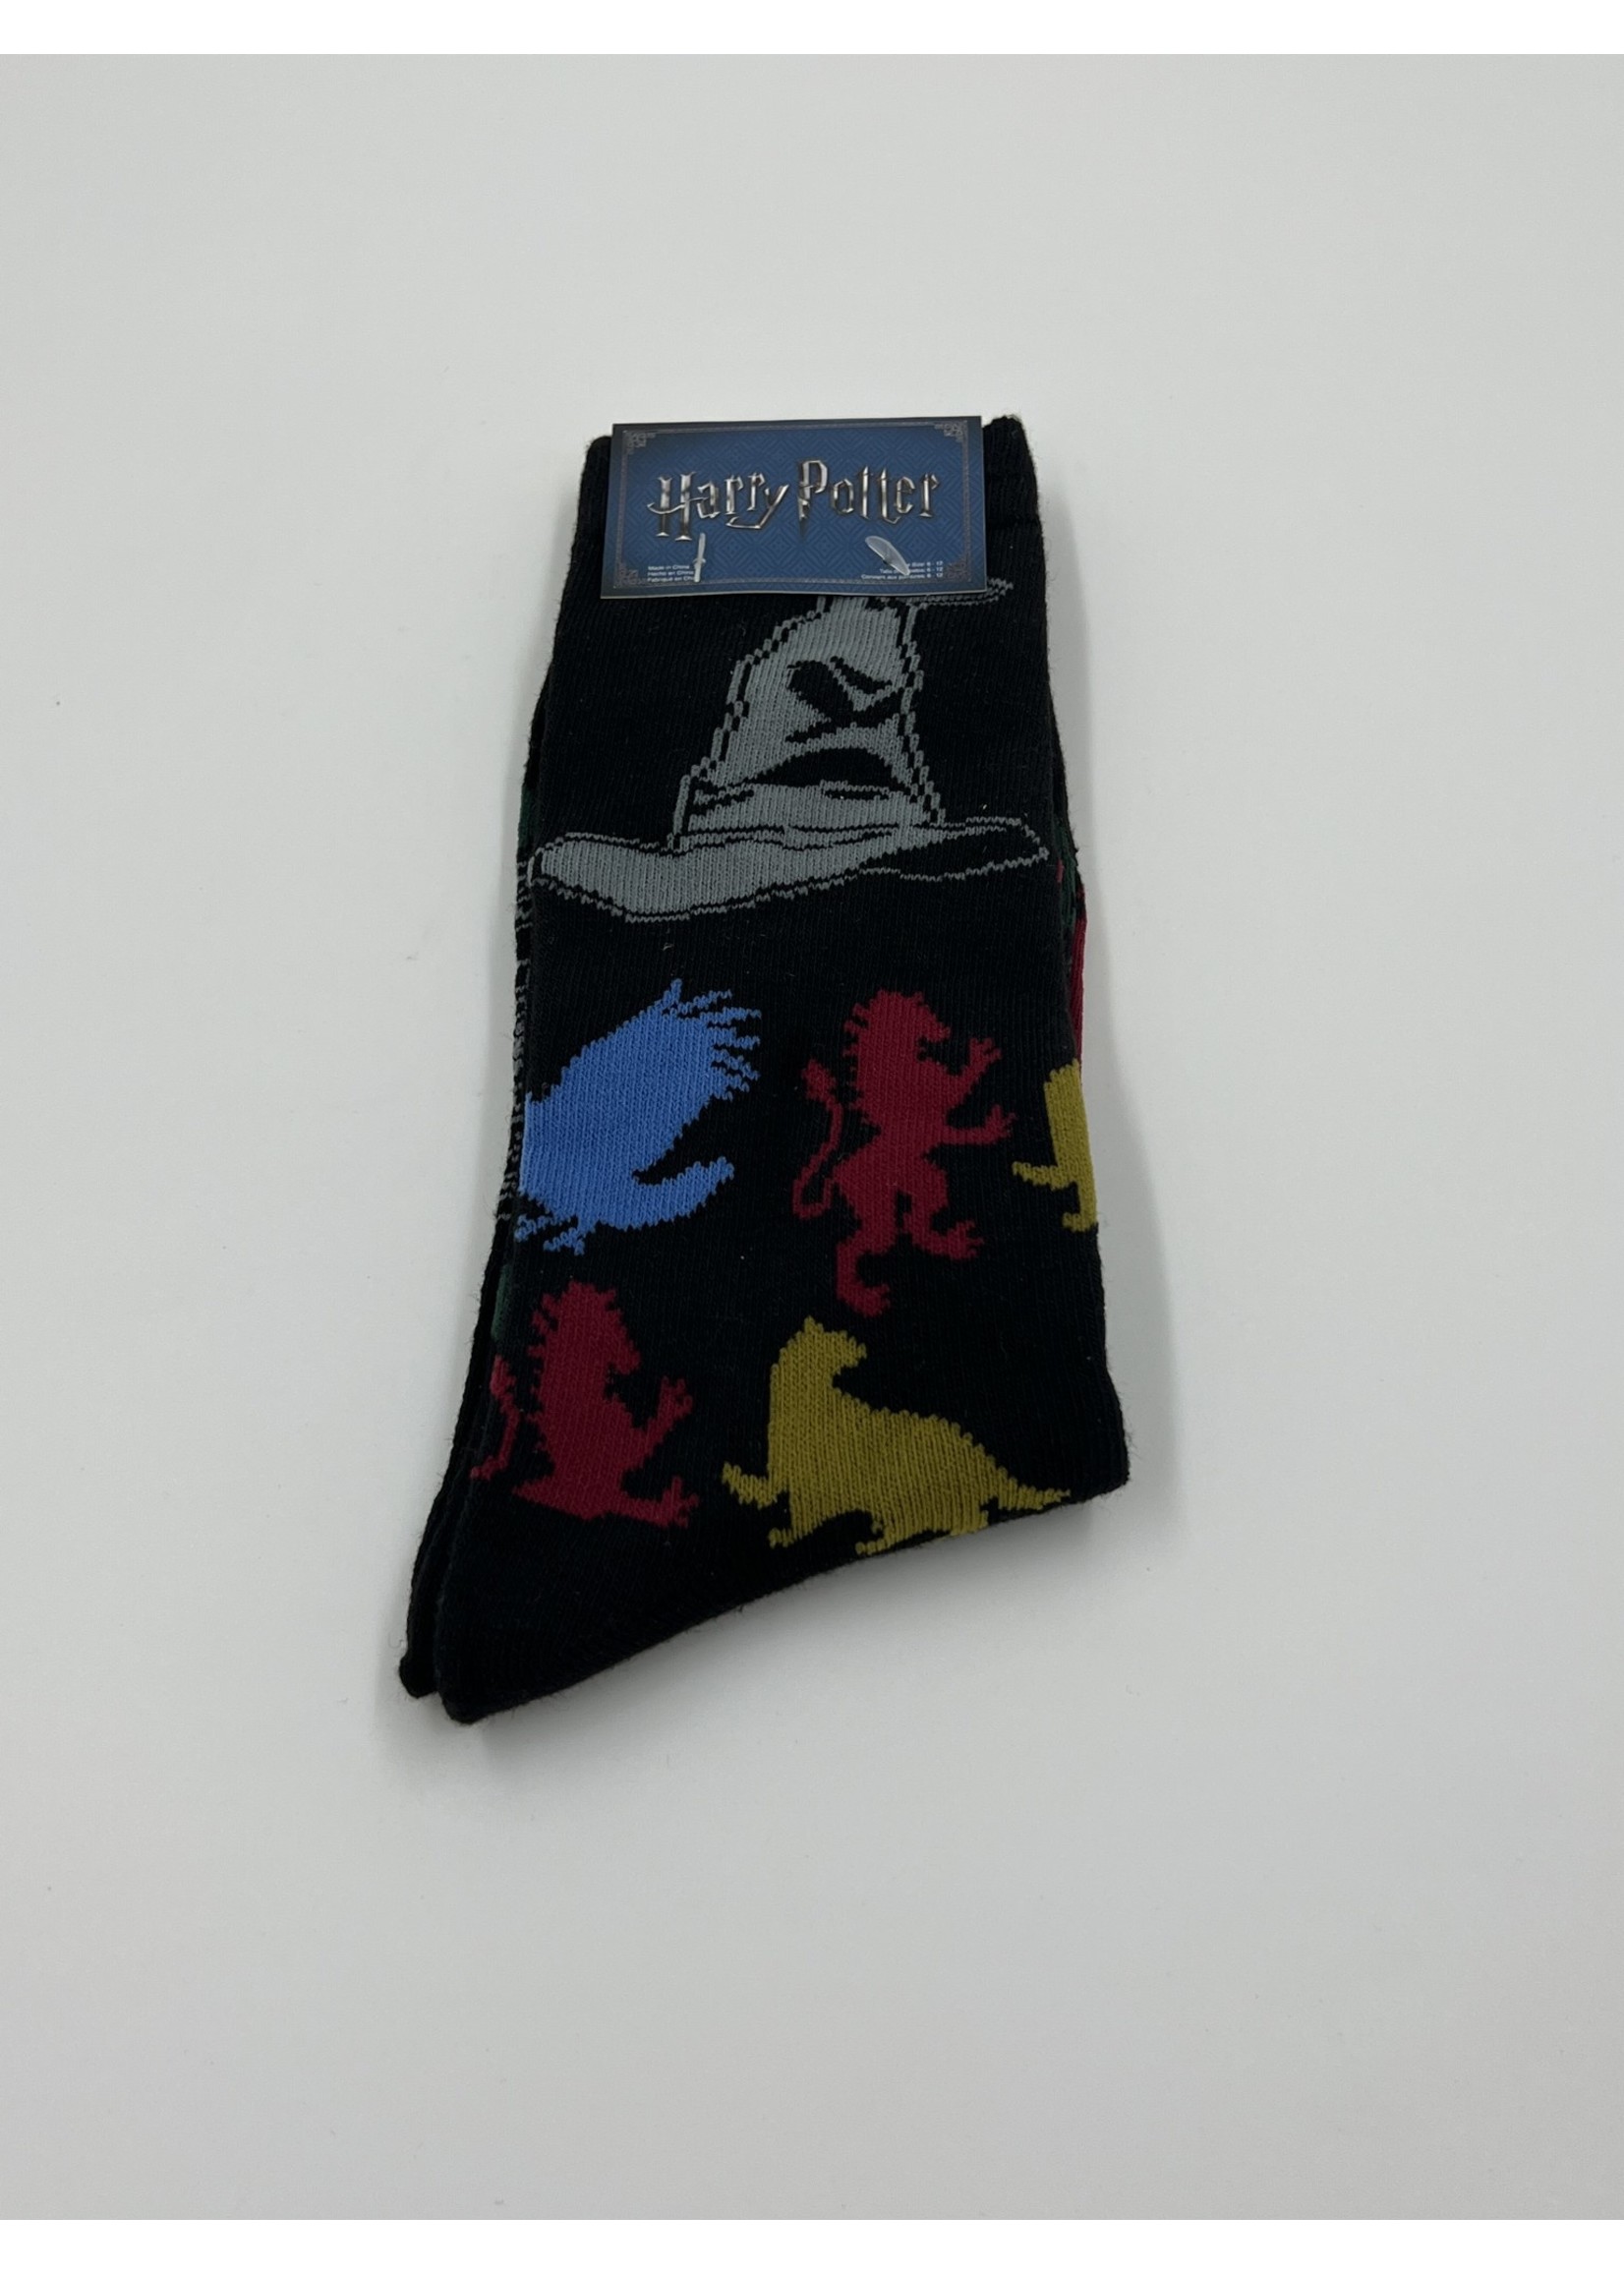 Other Things Harry Potter Socks Size 6-12